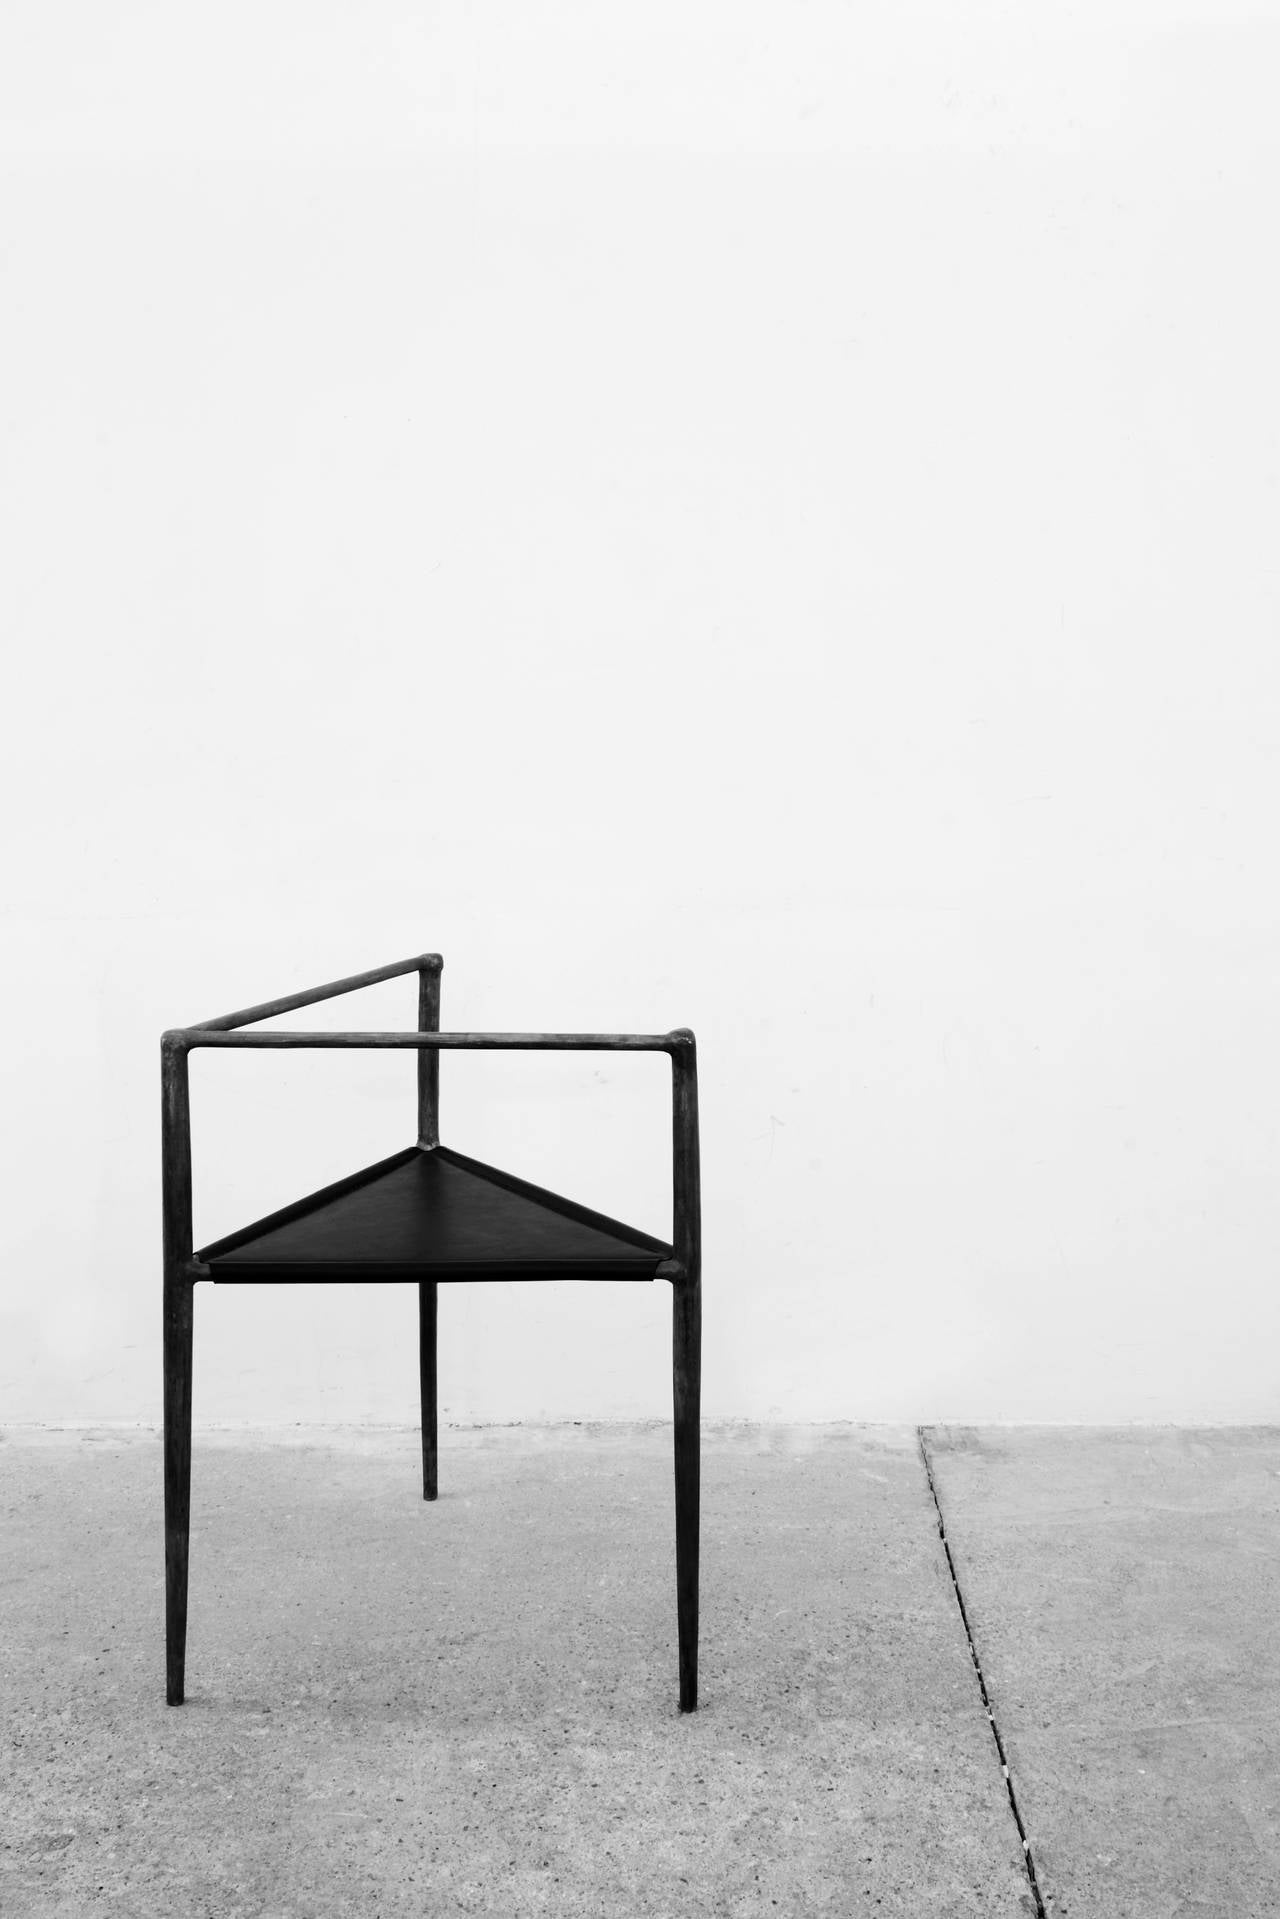 The alchemy chair by Rick Owens is conceptually established on a triangular prism wireframe. Its Brutalist bronze legs and arms are elegantly tapered and textured, comfortably dissected by a plane of black leather upholstery. Not only is the alchemy